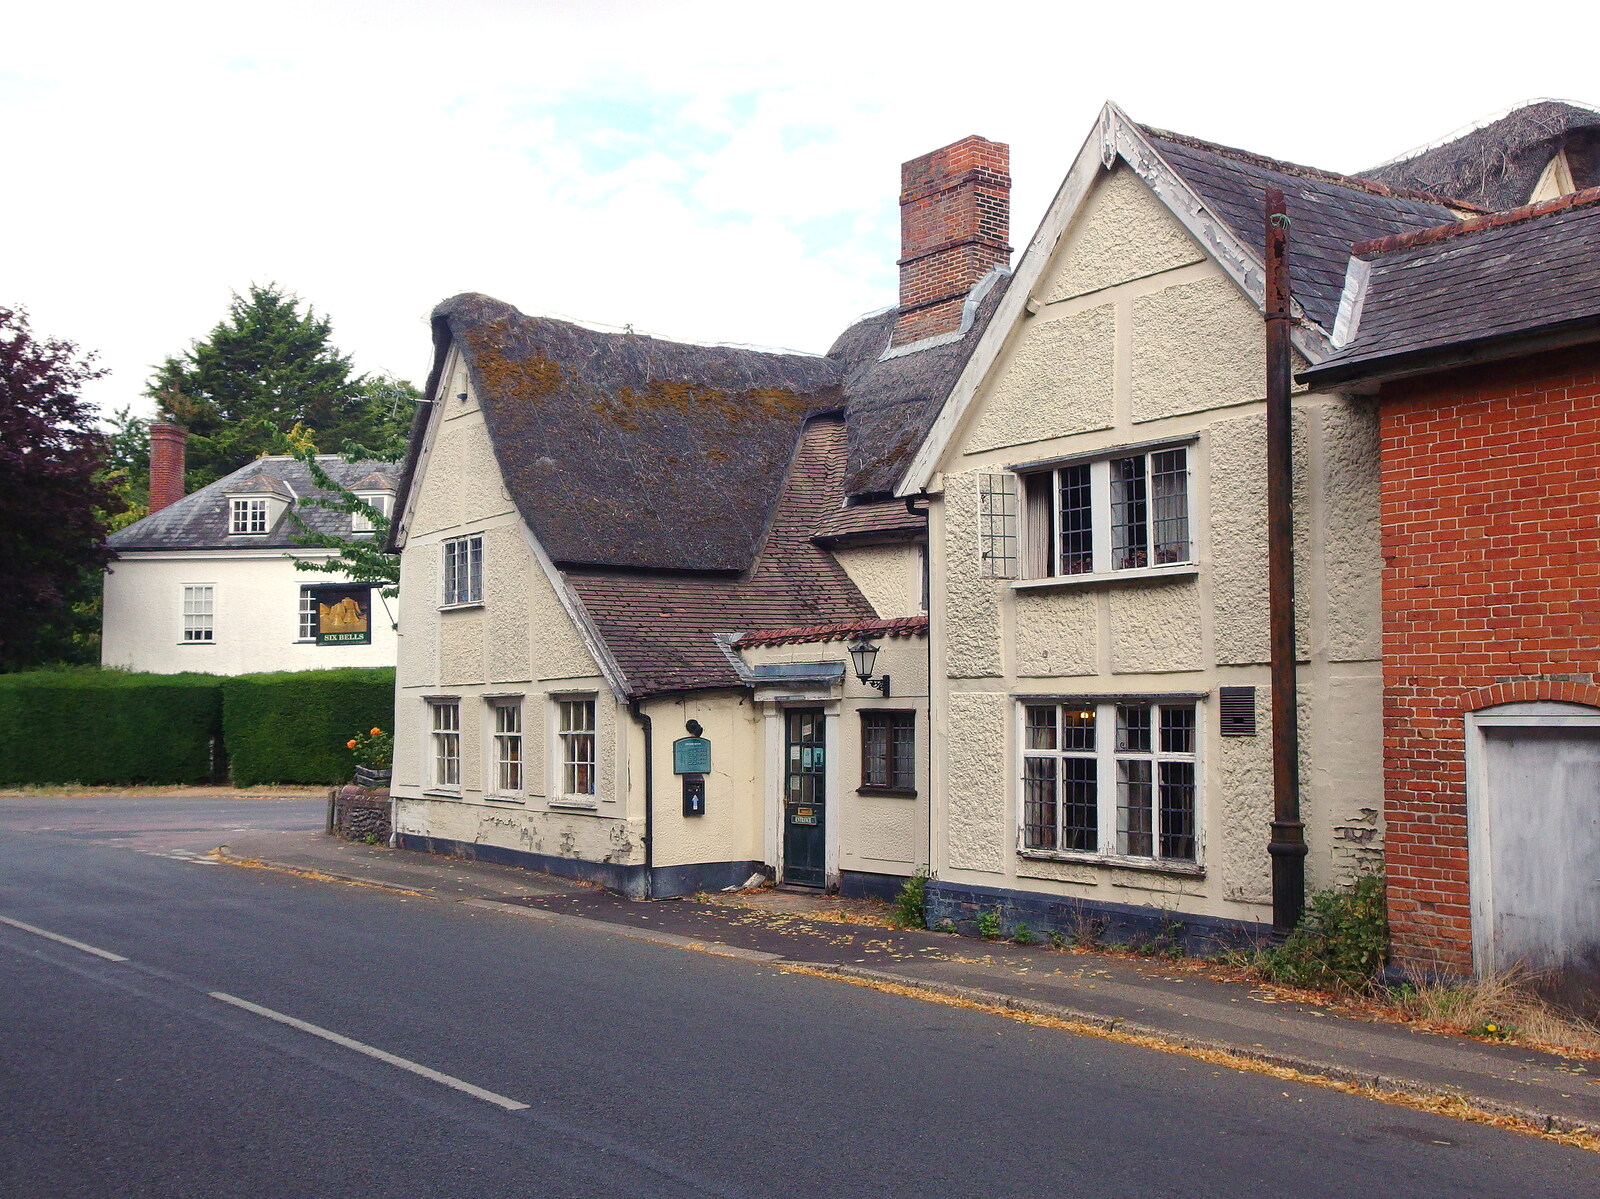 The possibly-derelict Six Bells from A Ride to Walsham Le Willows, Suffolk - 15th July 2022